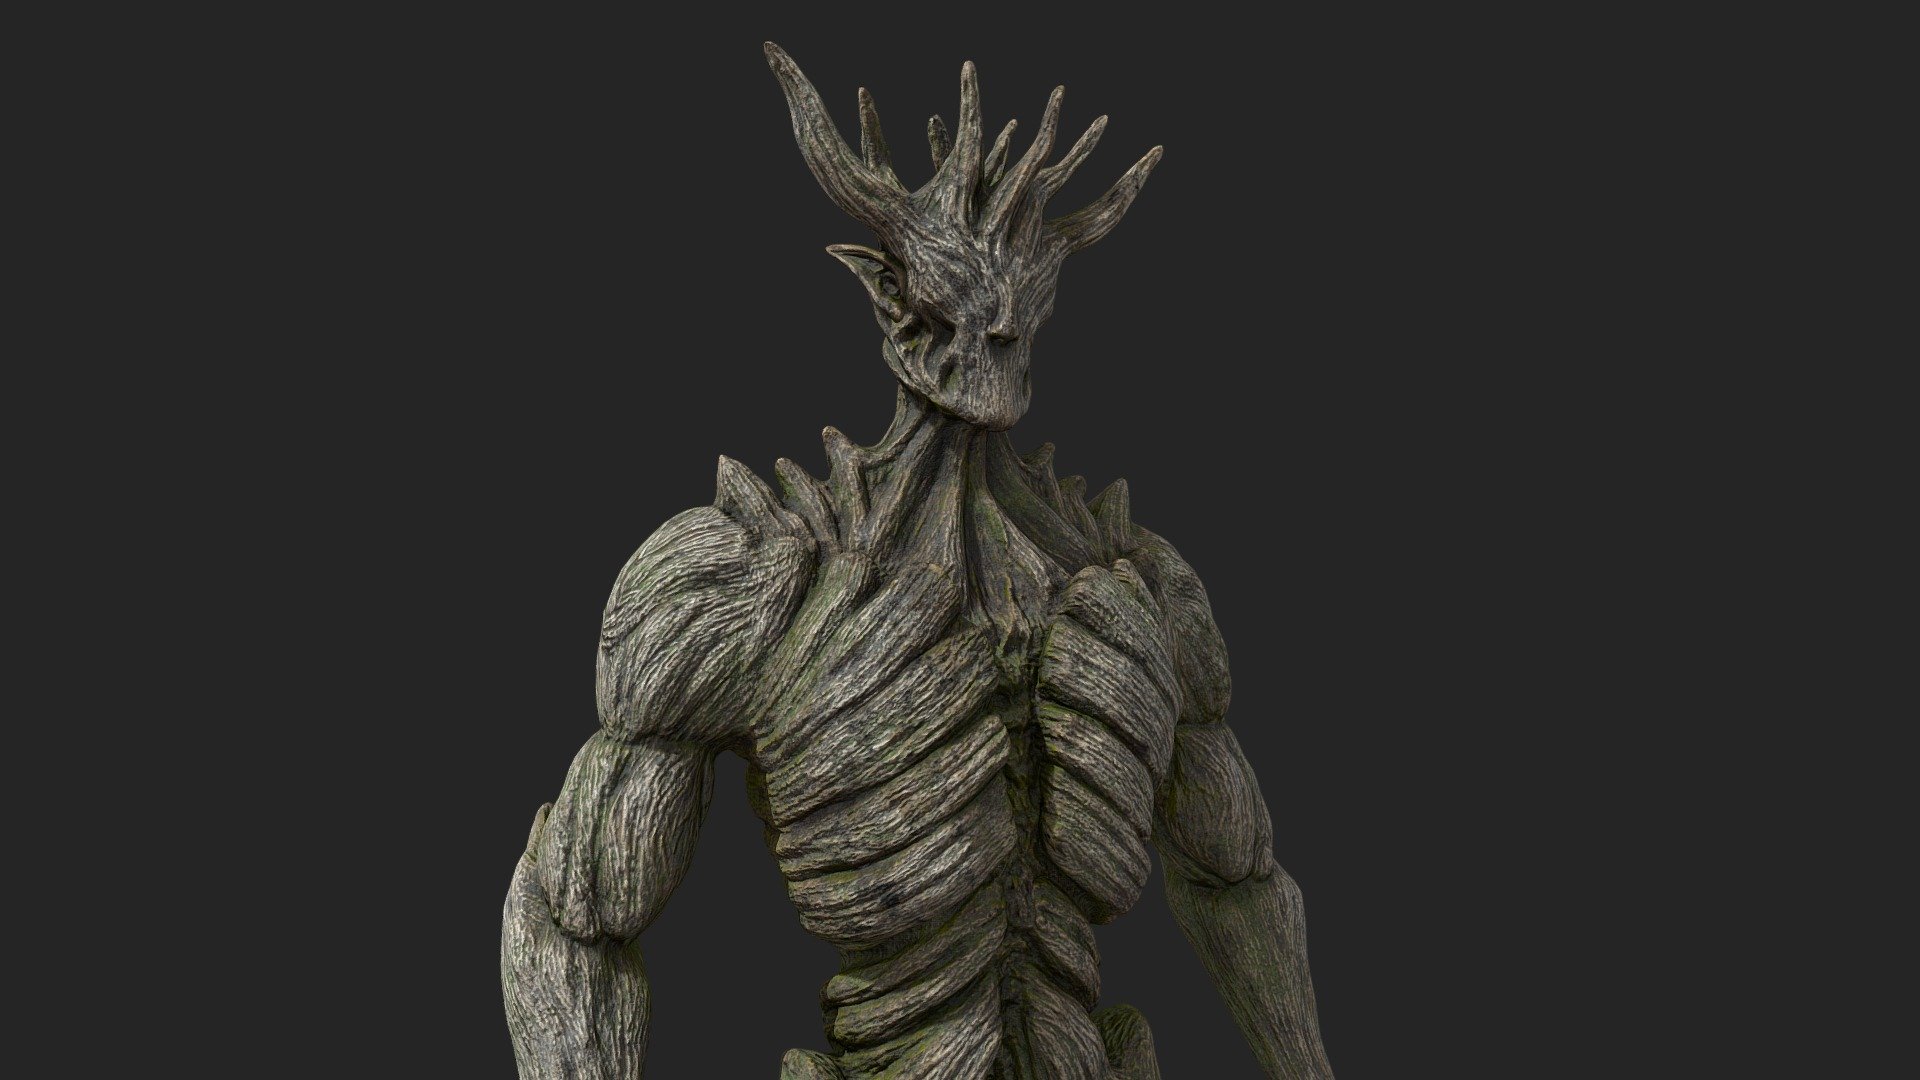 Green man highpoly mesh

4 materials with 4096x4096 JPG texture

I hope you like it - Green man - Buy Royalty Free 3D model by KhucLam (@khuctunglam) 3d model